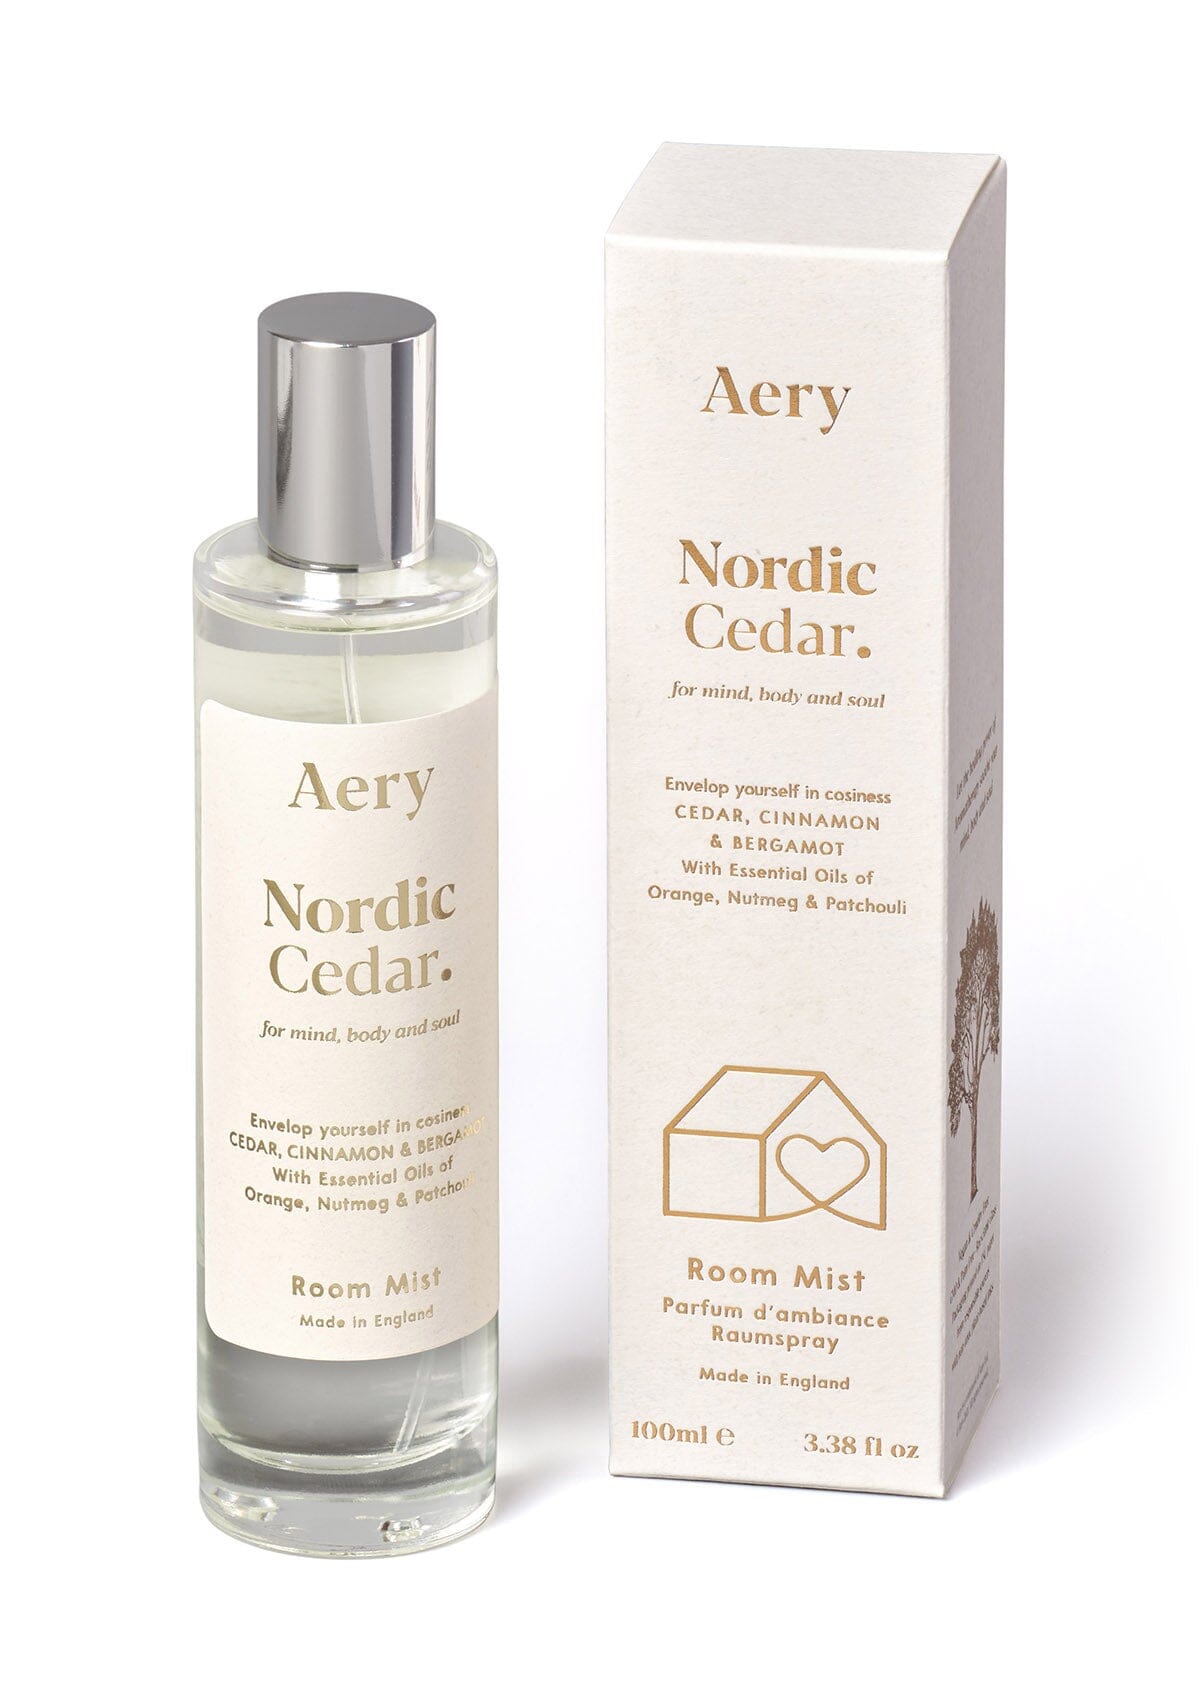 White Nordic Cedar room mist displayed next to product packaging by Aery on white background 